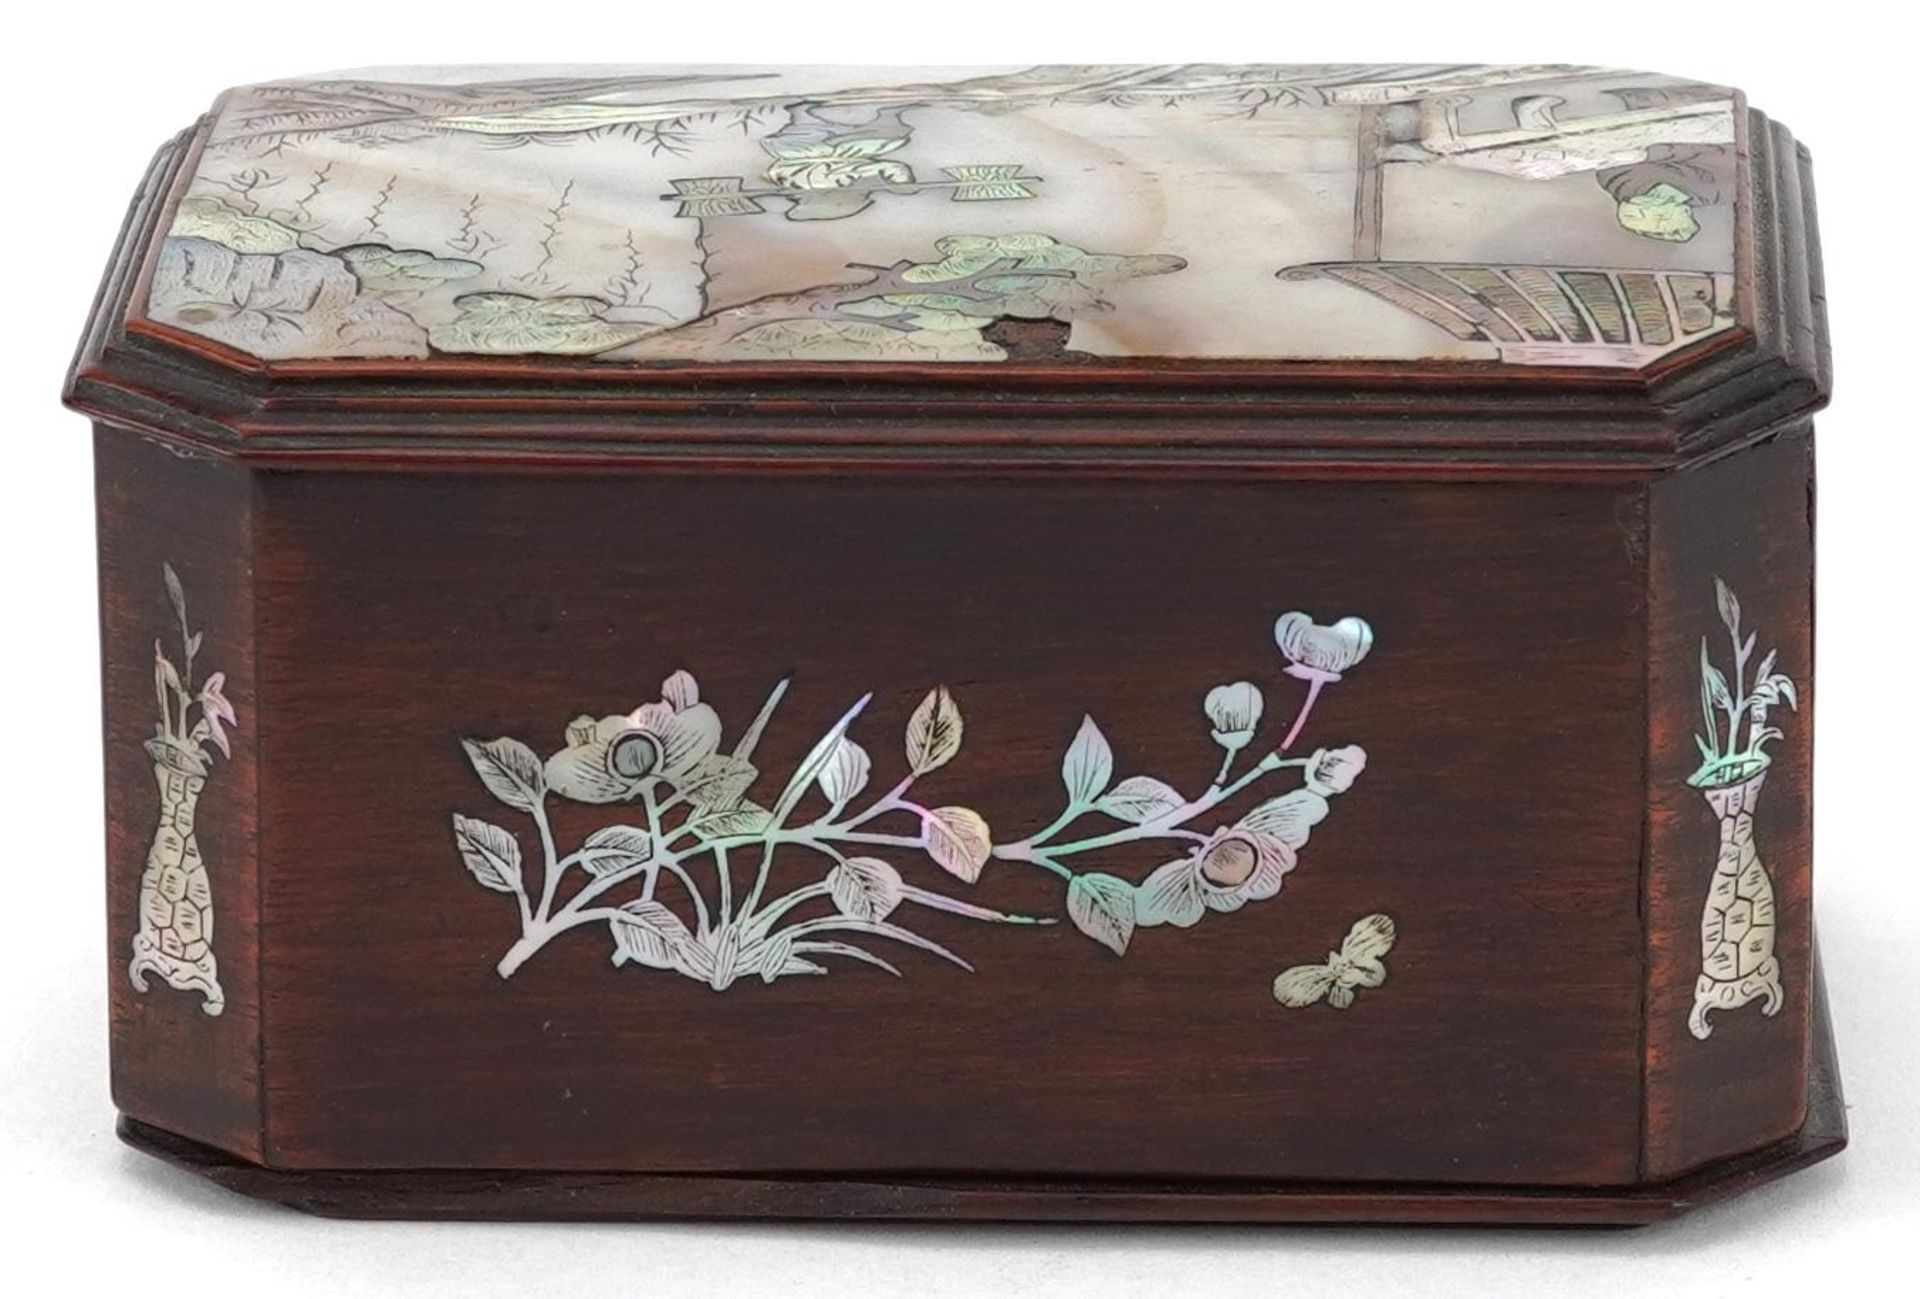 Chinese hardwood box and cover with canted corners and abalone inlay depicting attendant attending a - Image 5 of 7